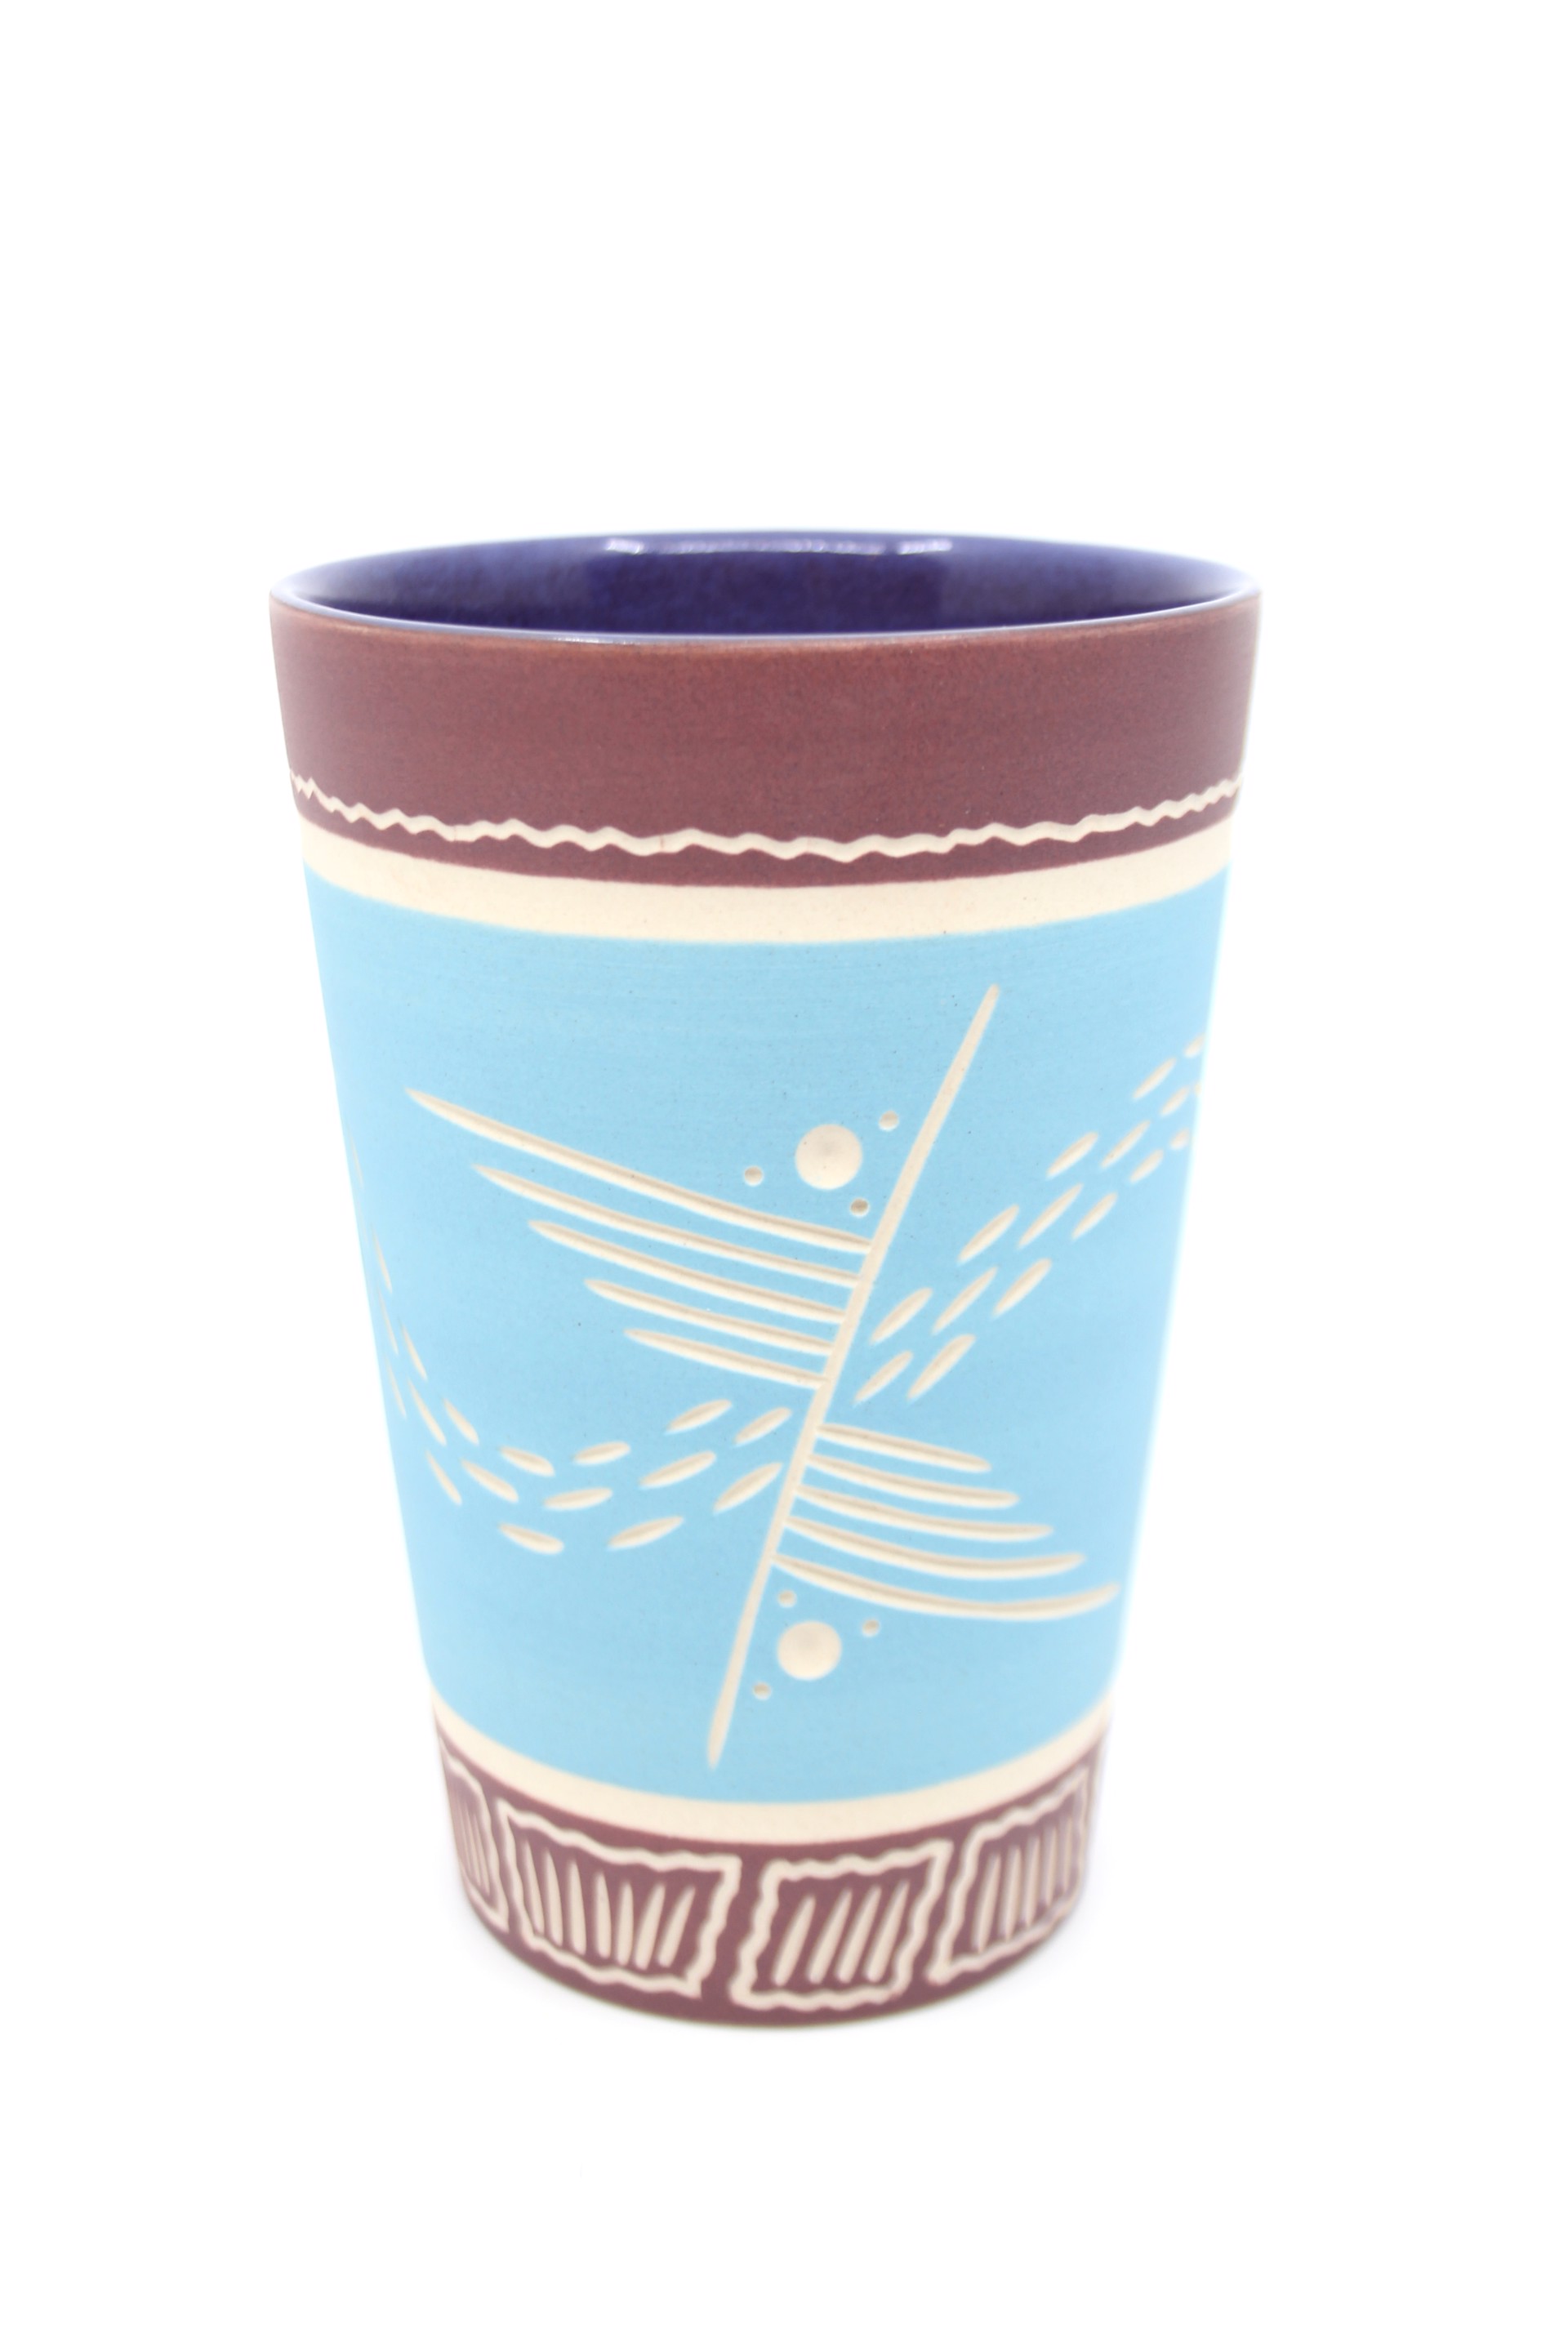 Lavender/Aqua Tall Cup by Chris Casey